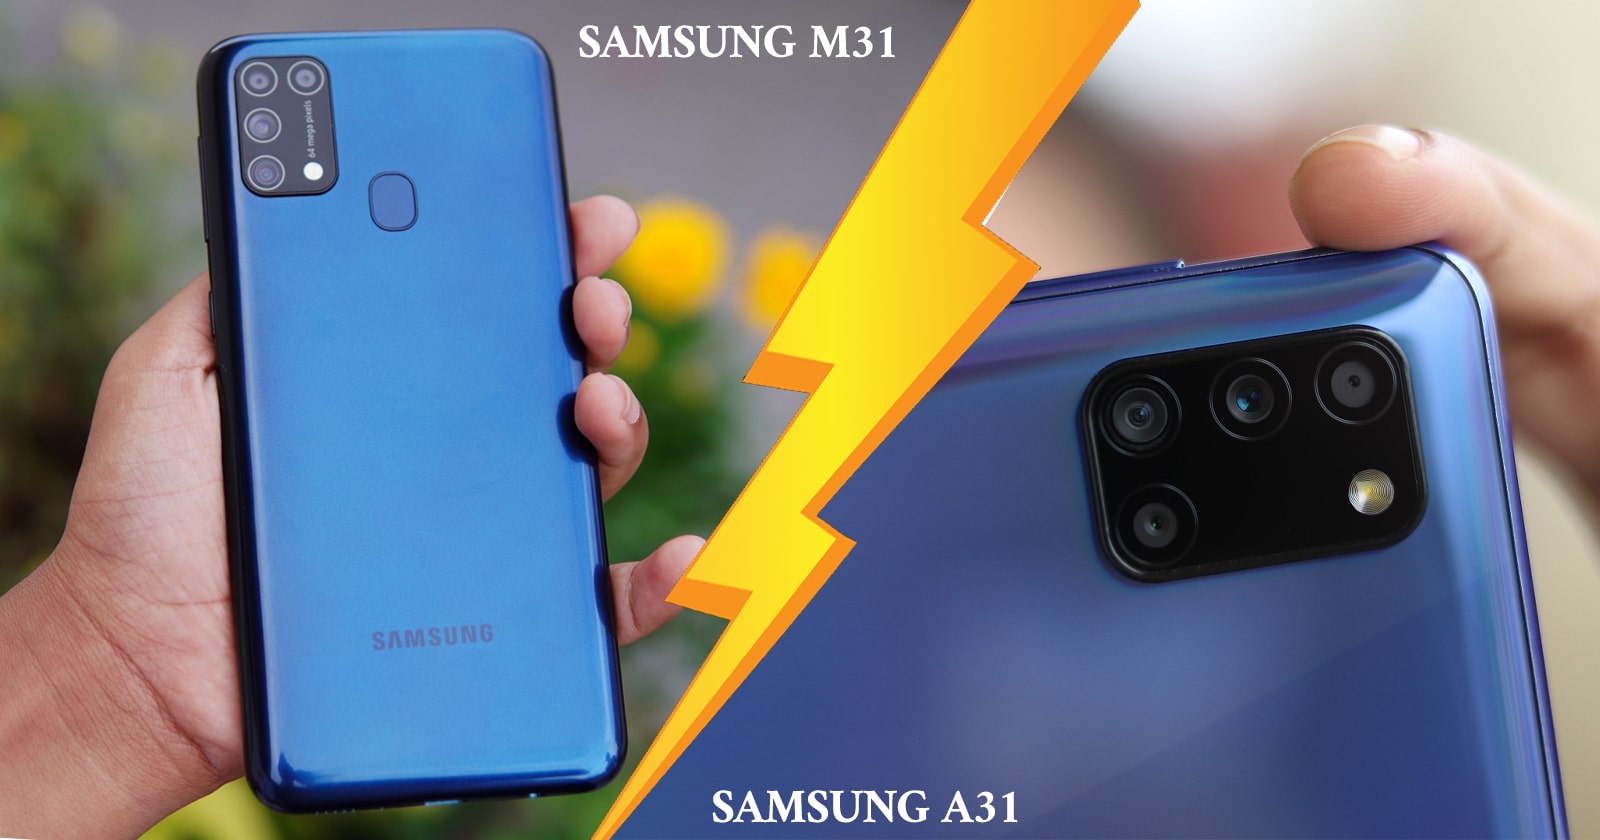 What Is the Difference Between Samsung M31 and A31